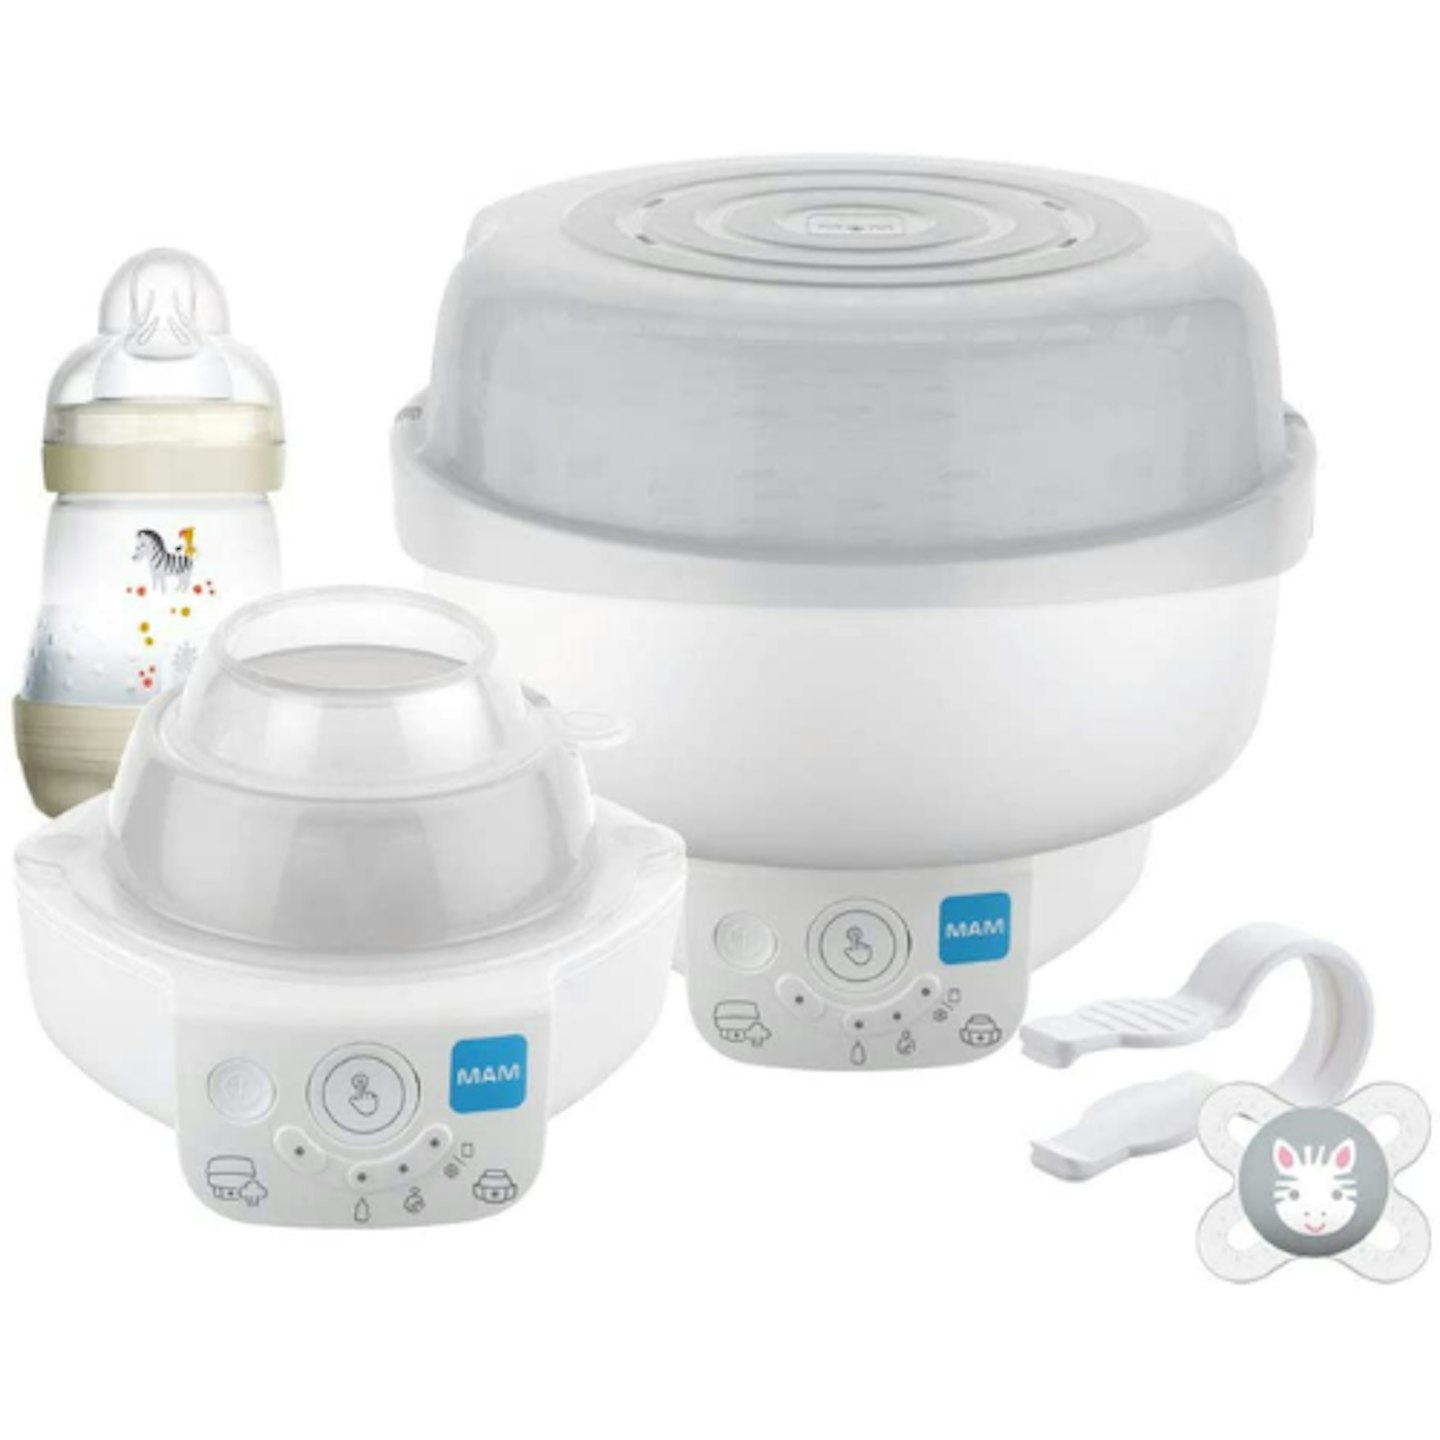  Formula Ready Baby Water Kettle- One Button Boil Cool Down and  Keep Warm at Perfect Temperature 24/7 - Dispense Water Instantly- Replace  Traditional Bottle Warmer : Baby